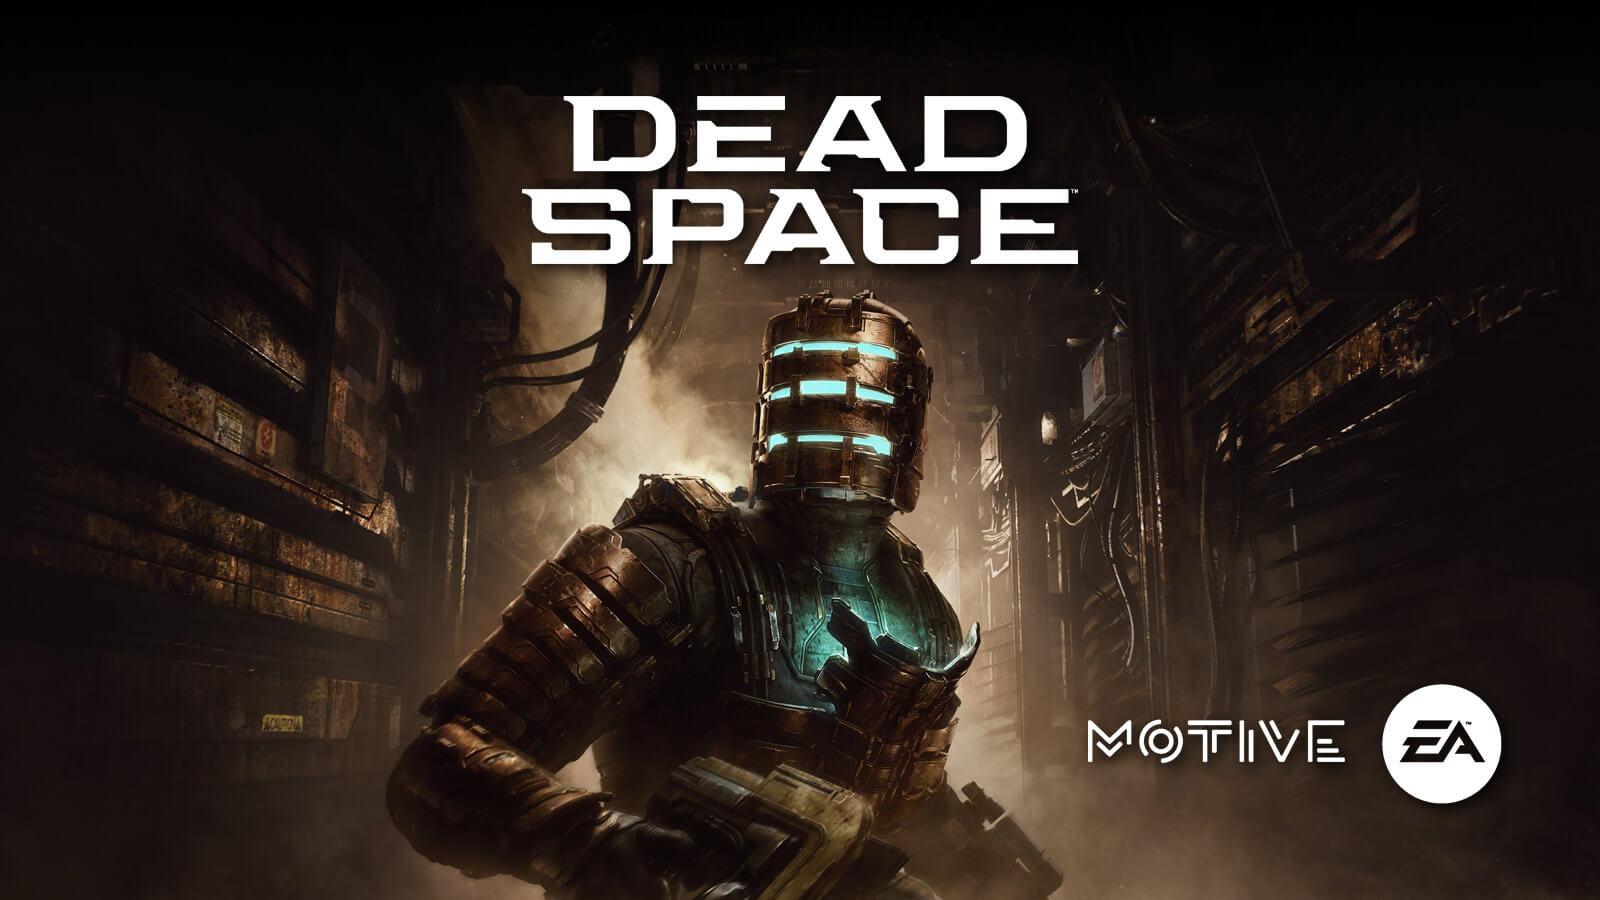 Dead Space remaster receives great reviews as players find all new details and improvements.